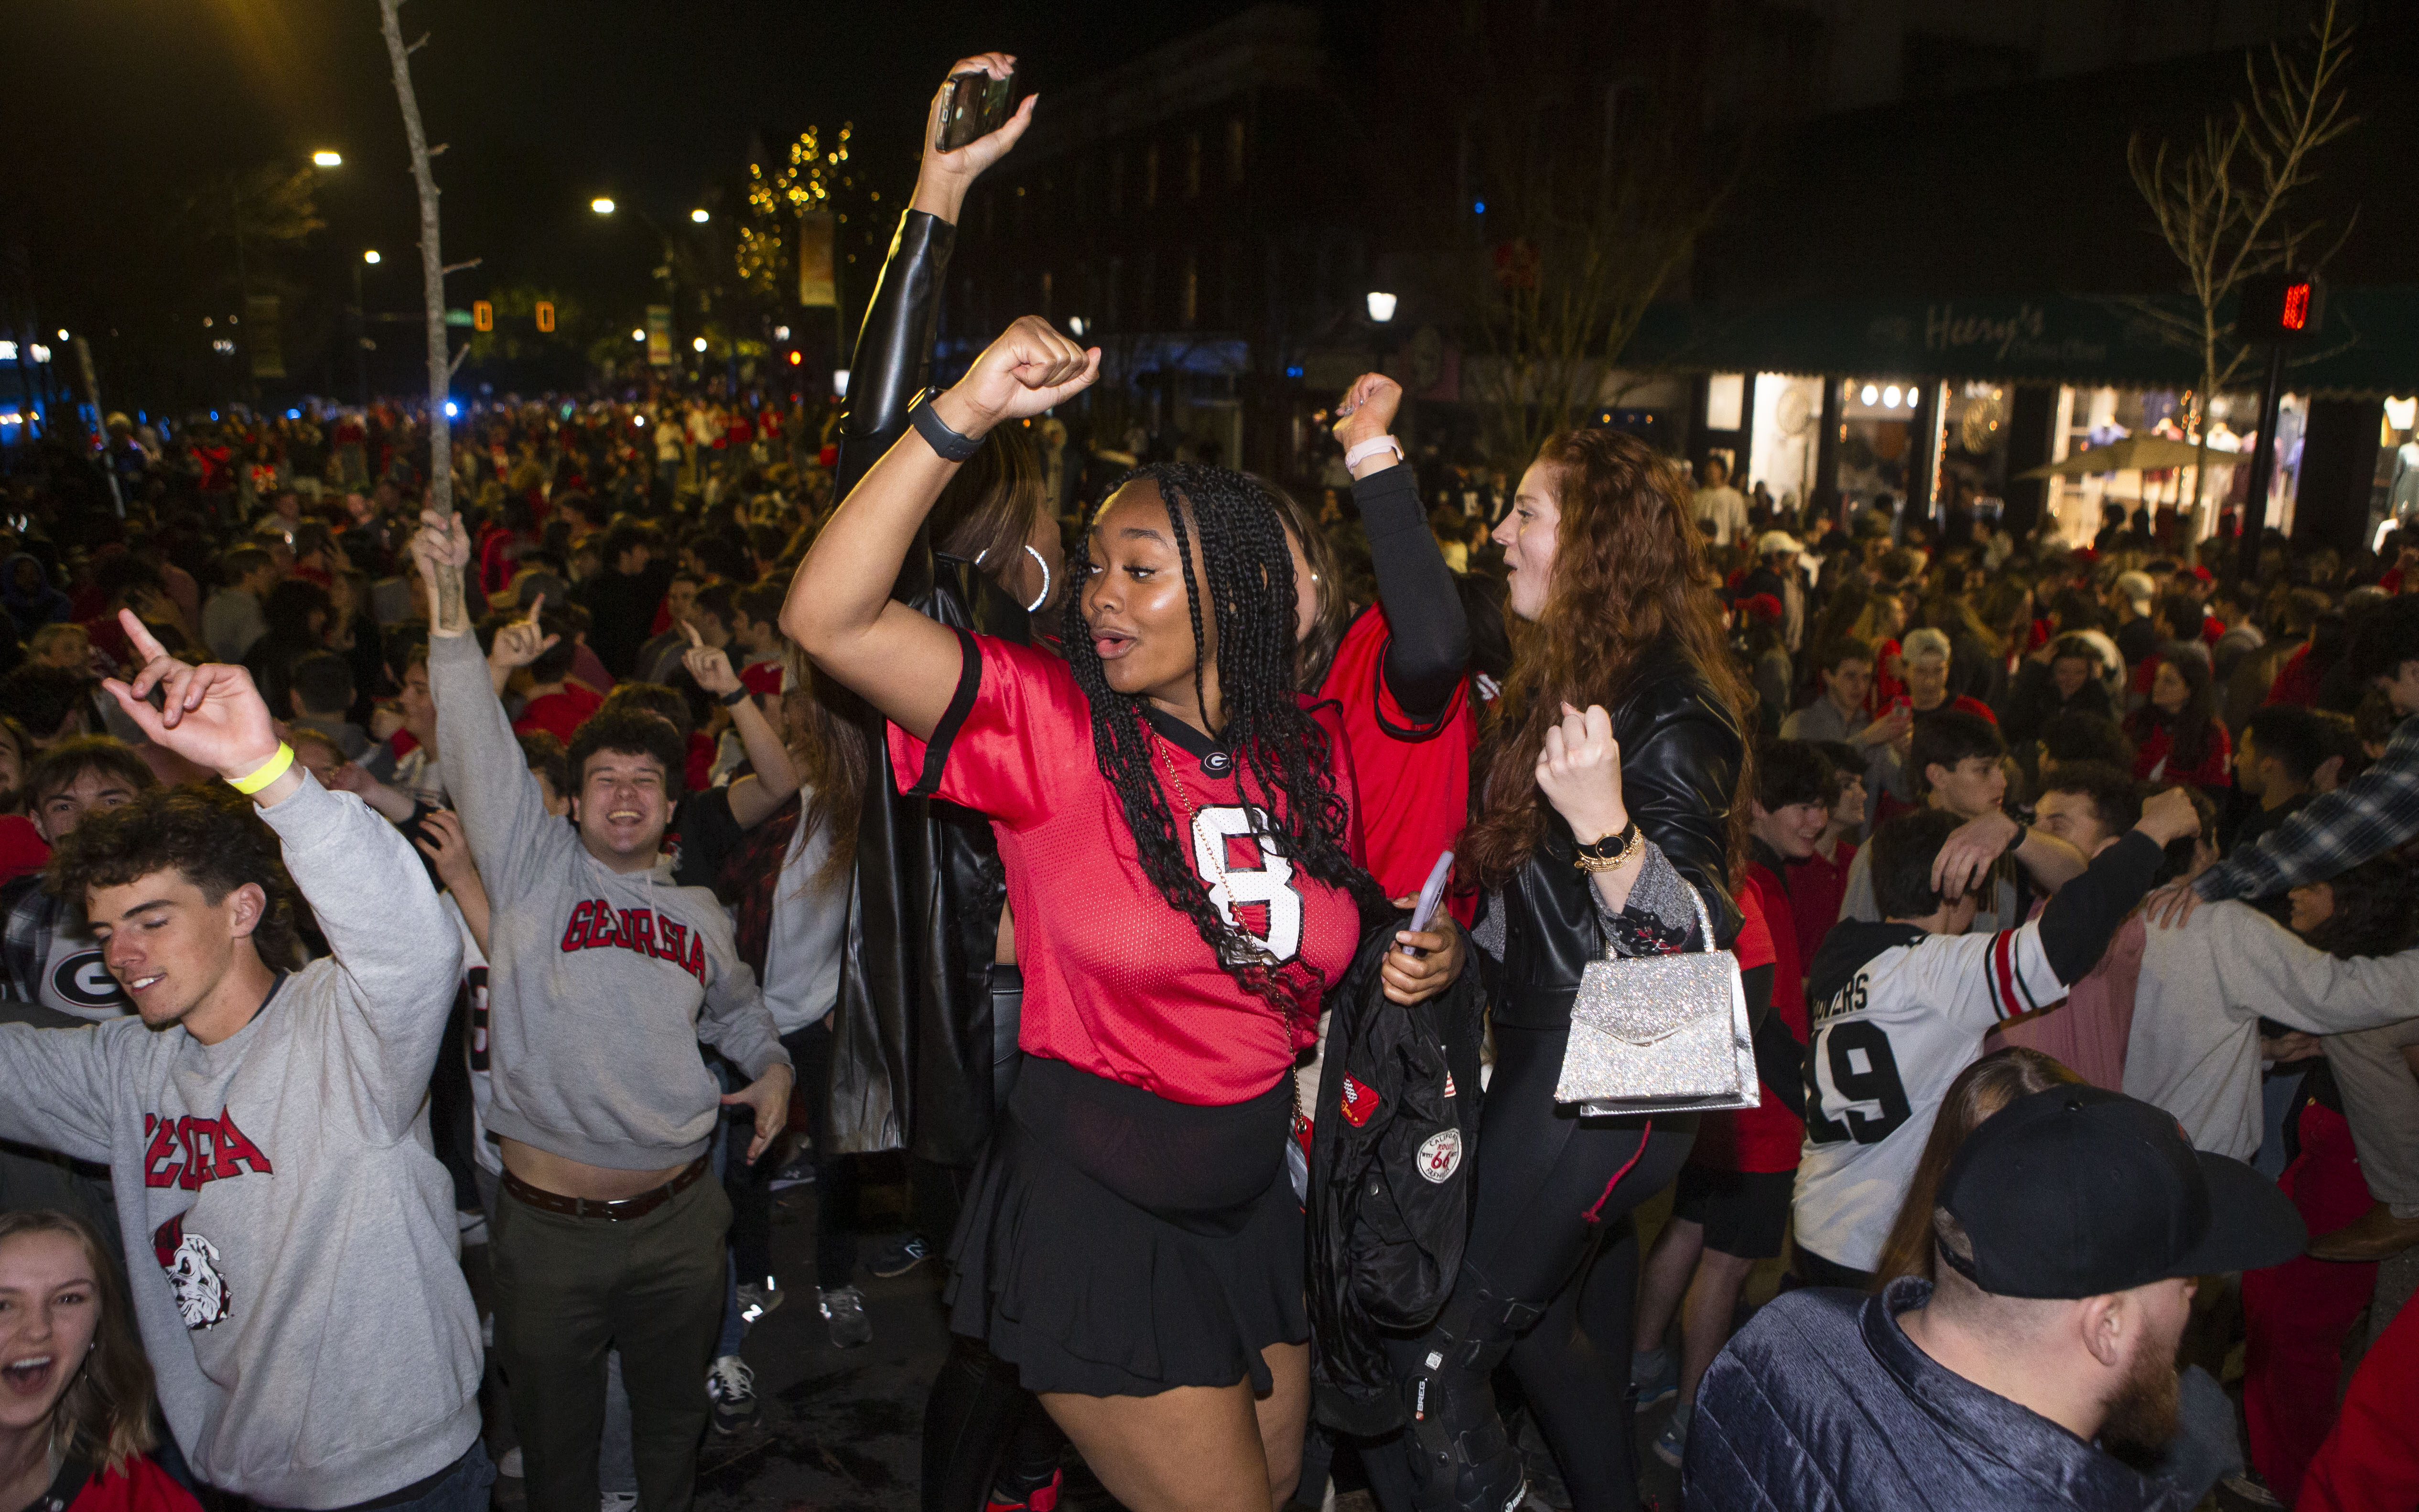 Athens to host championship parade for Georgia Bulldogs on Saturday